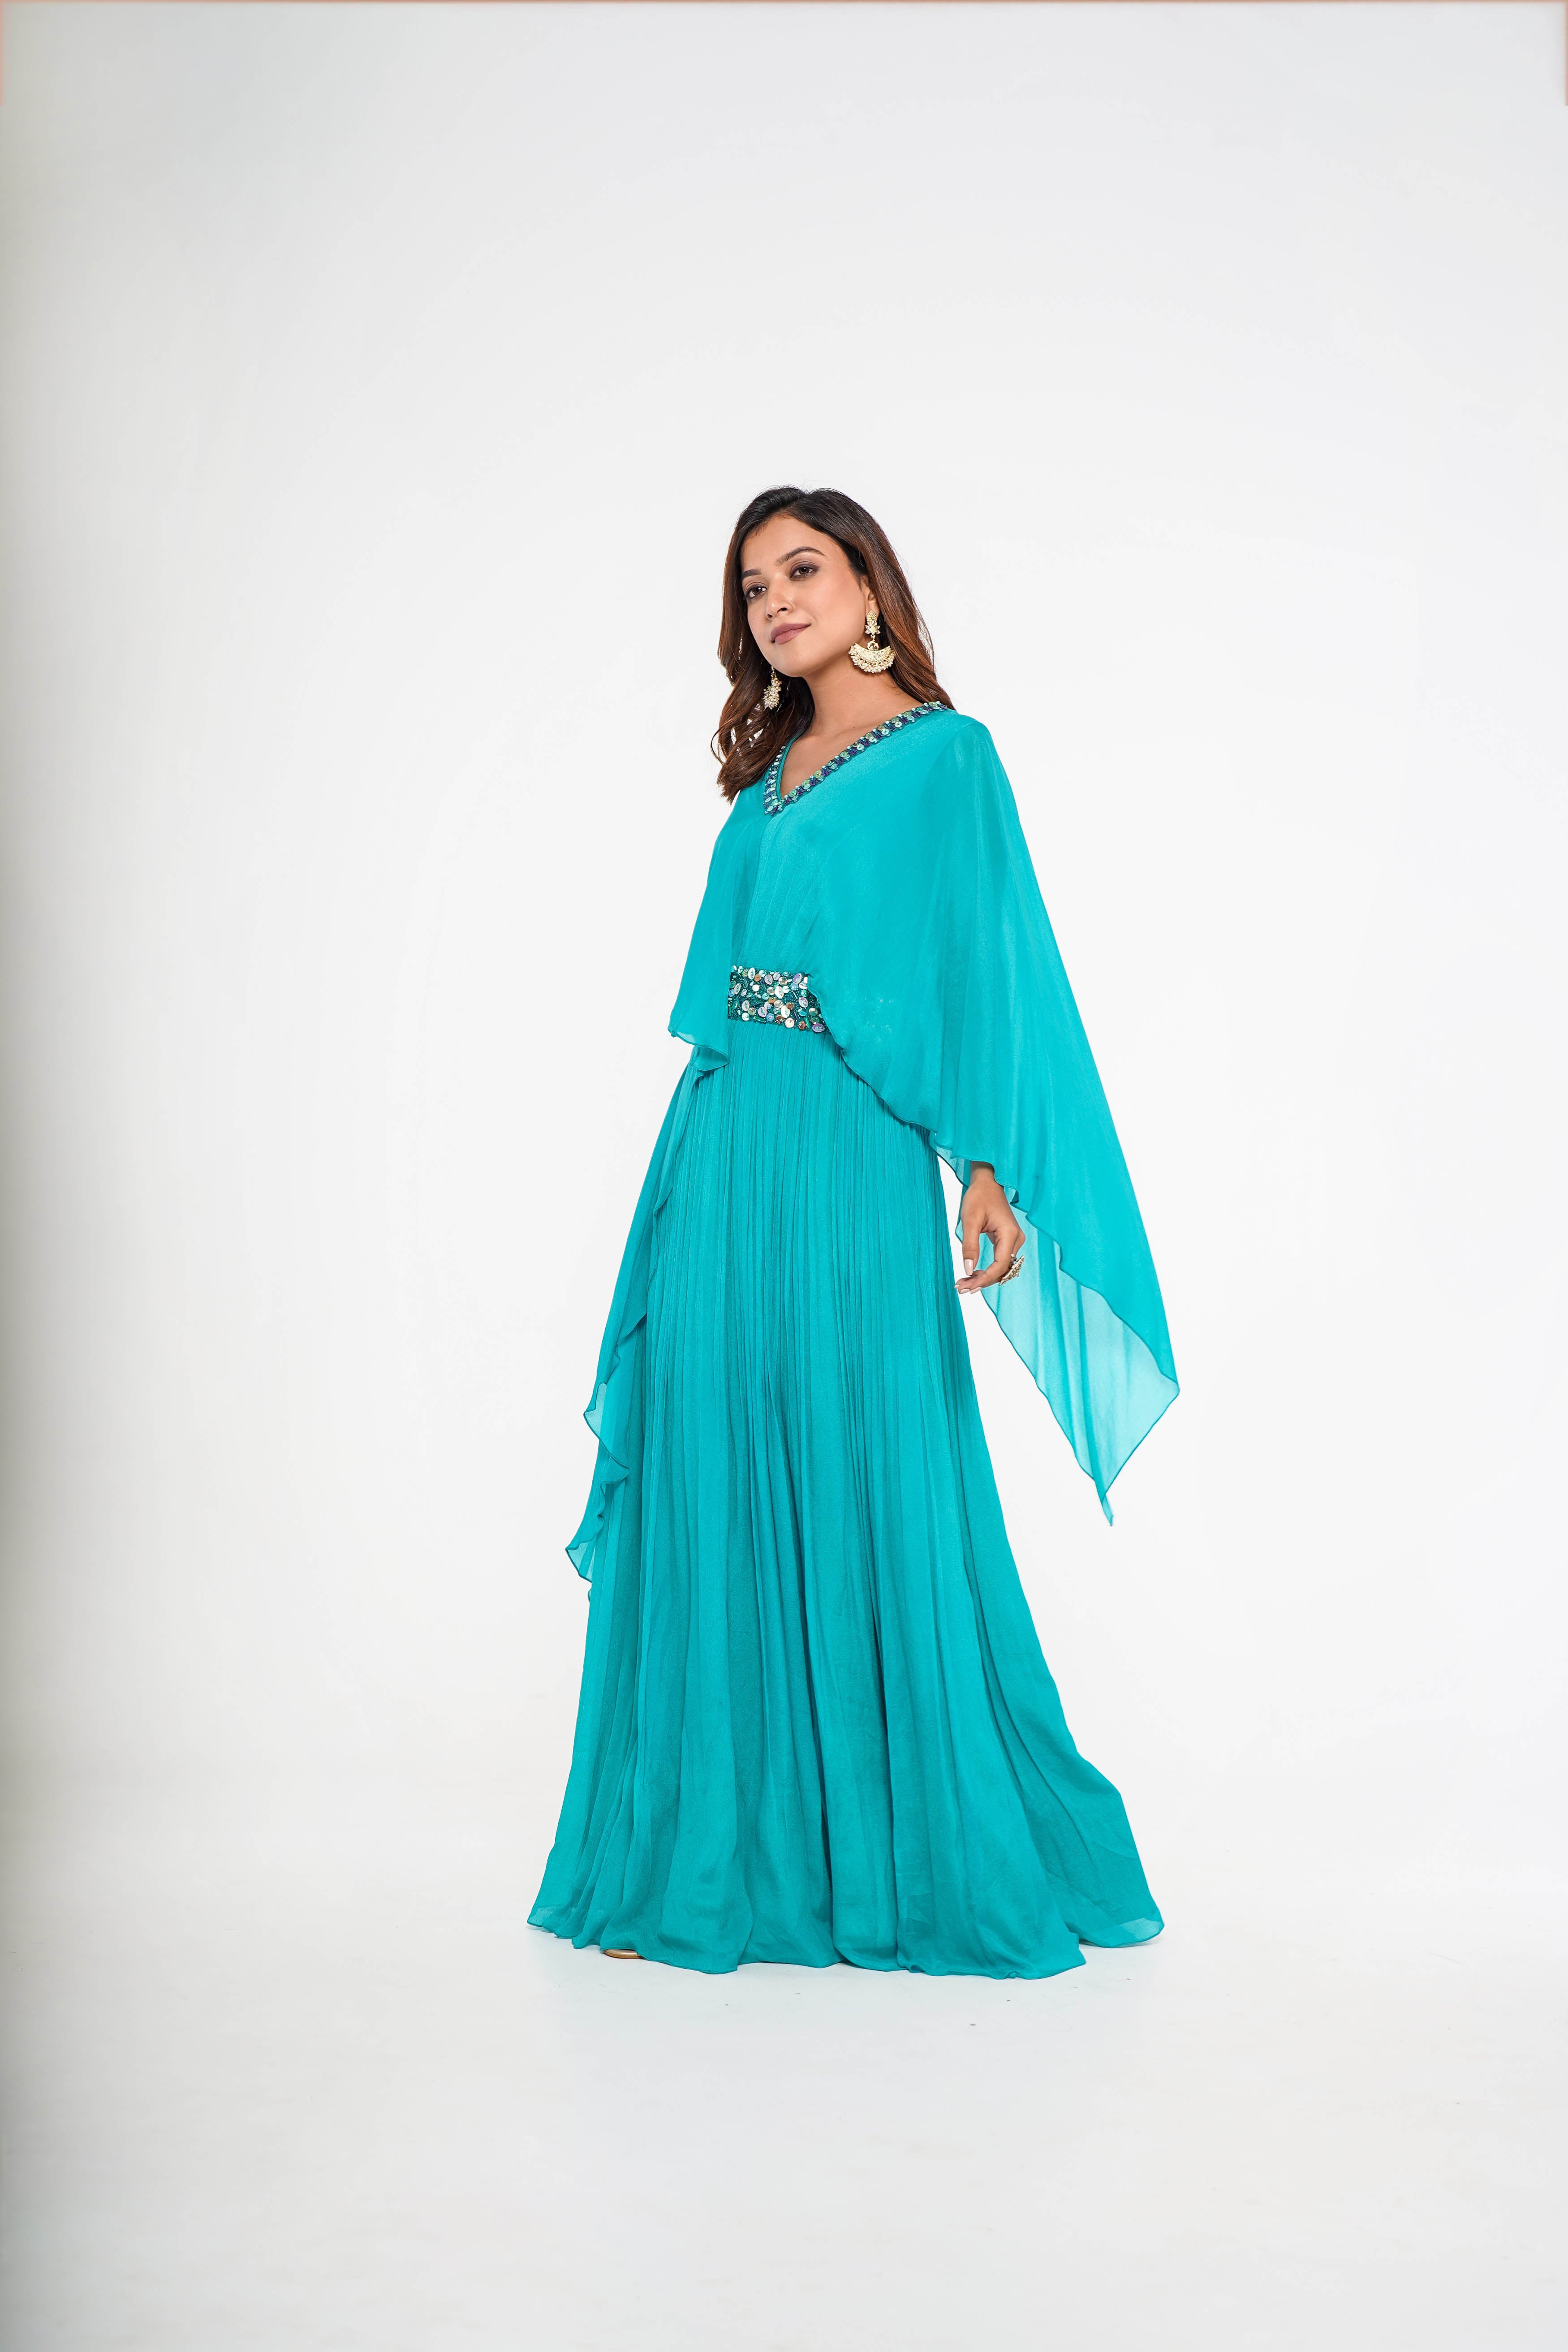 Sea green cape style draped gown.